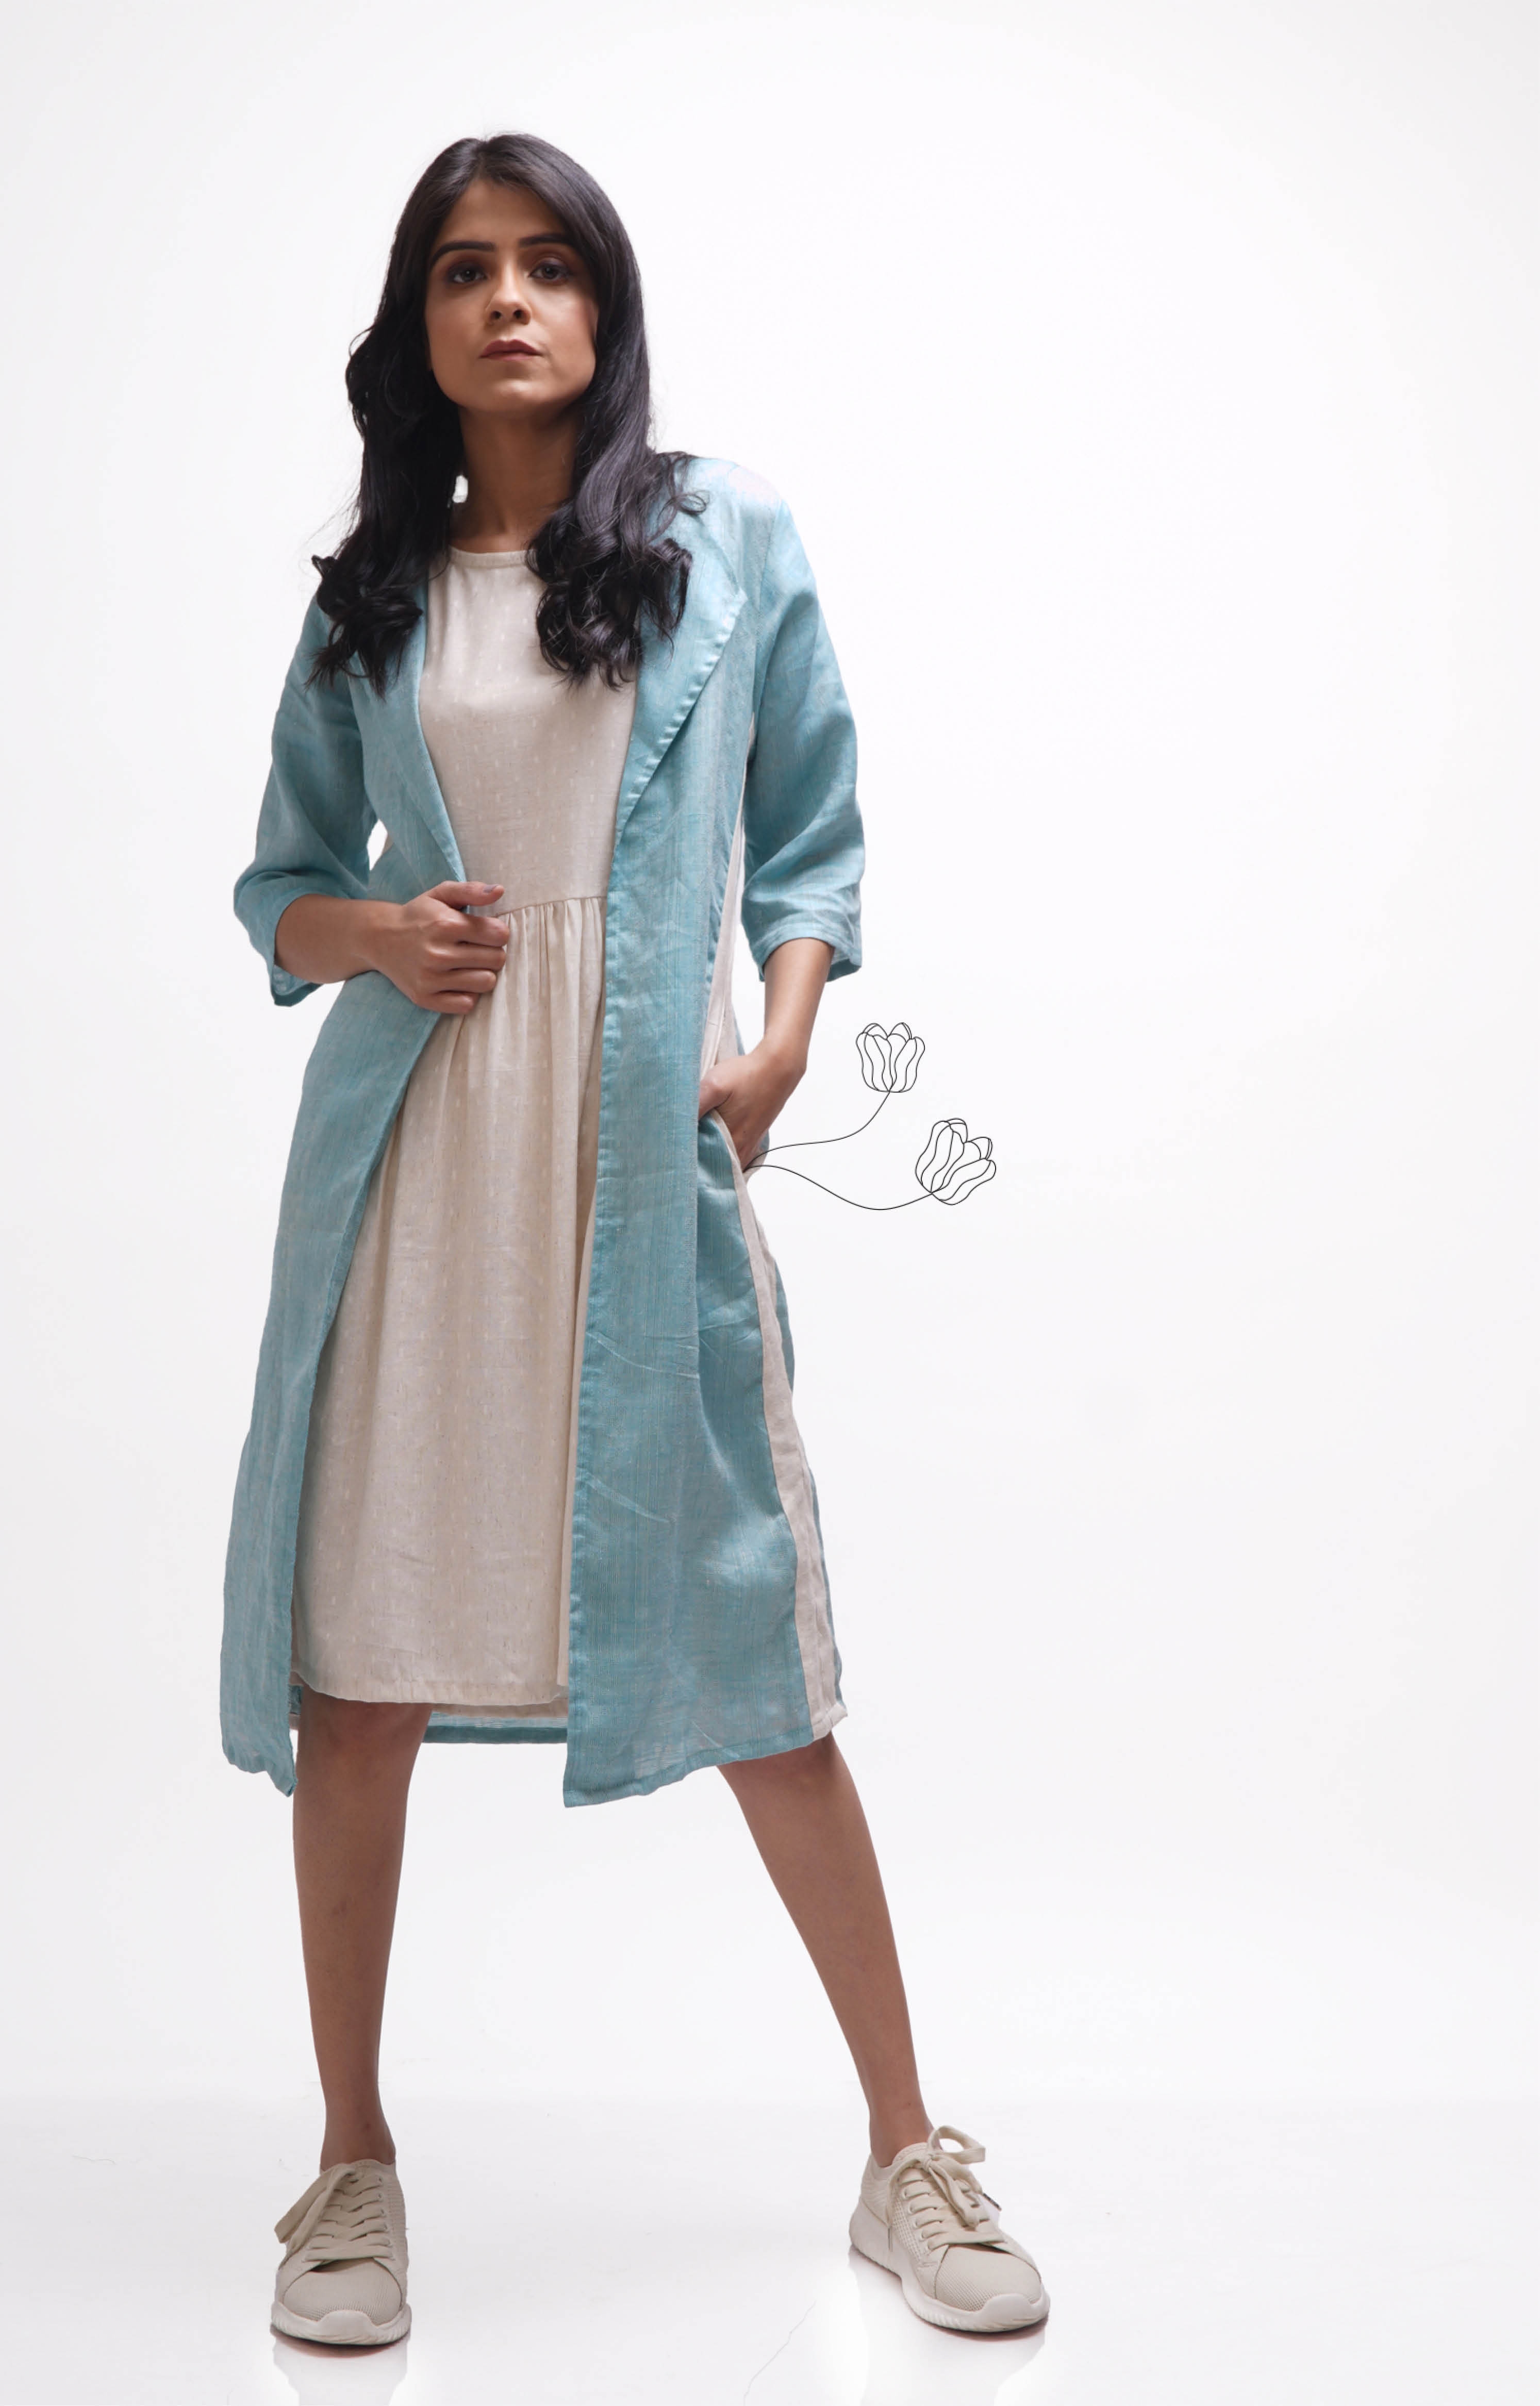 Cream Coloured Dress with Blue Overgarment.